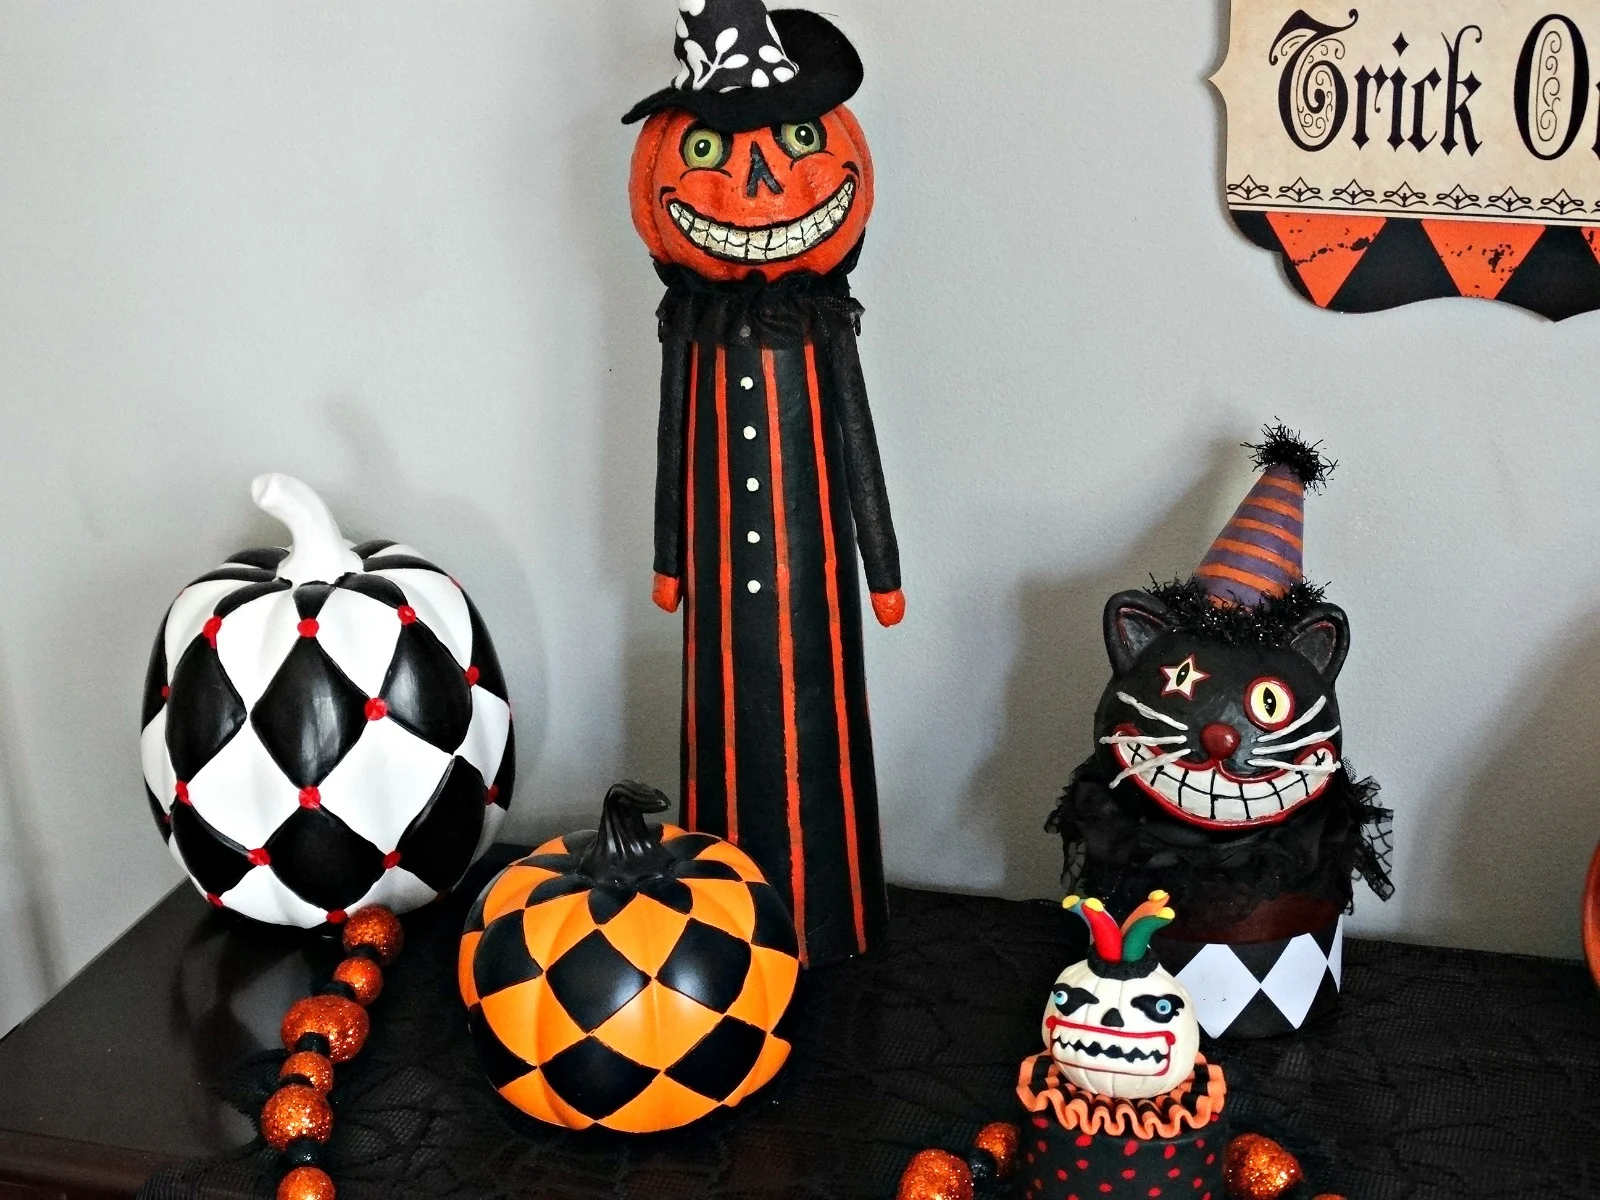 Haunted Harlequin tablescape checkered pumpkins and figurines